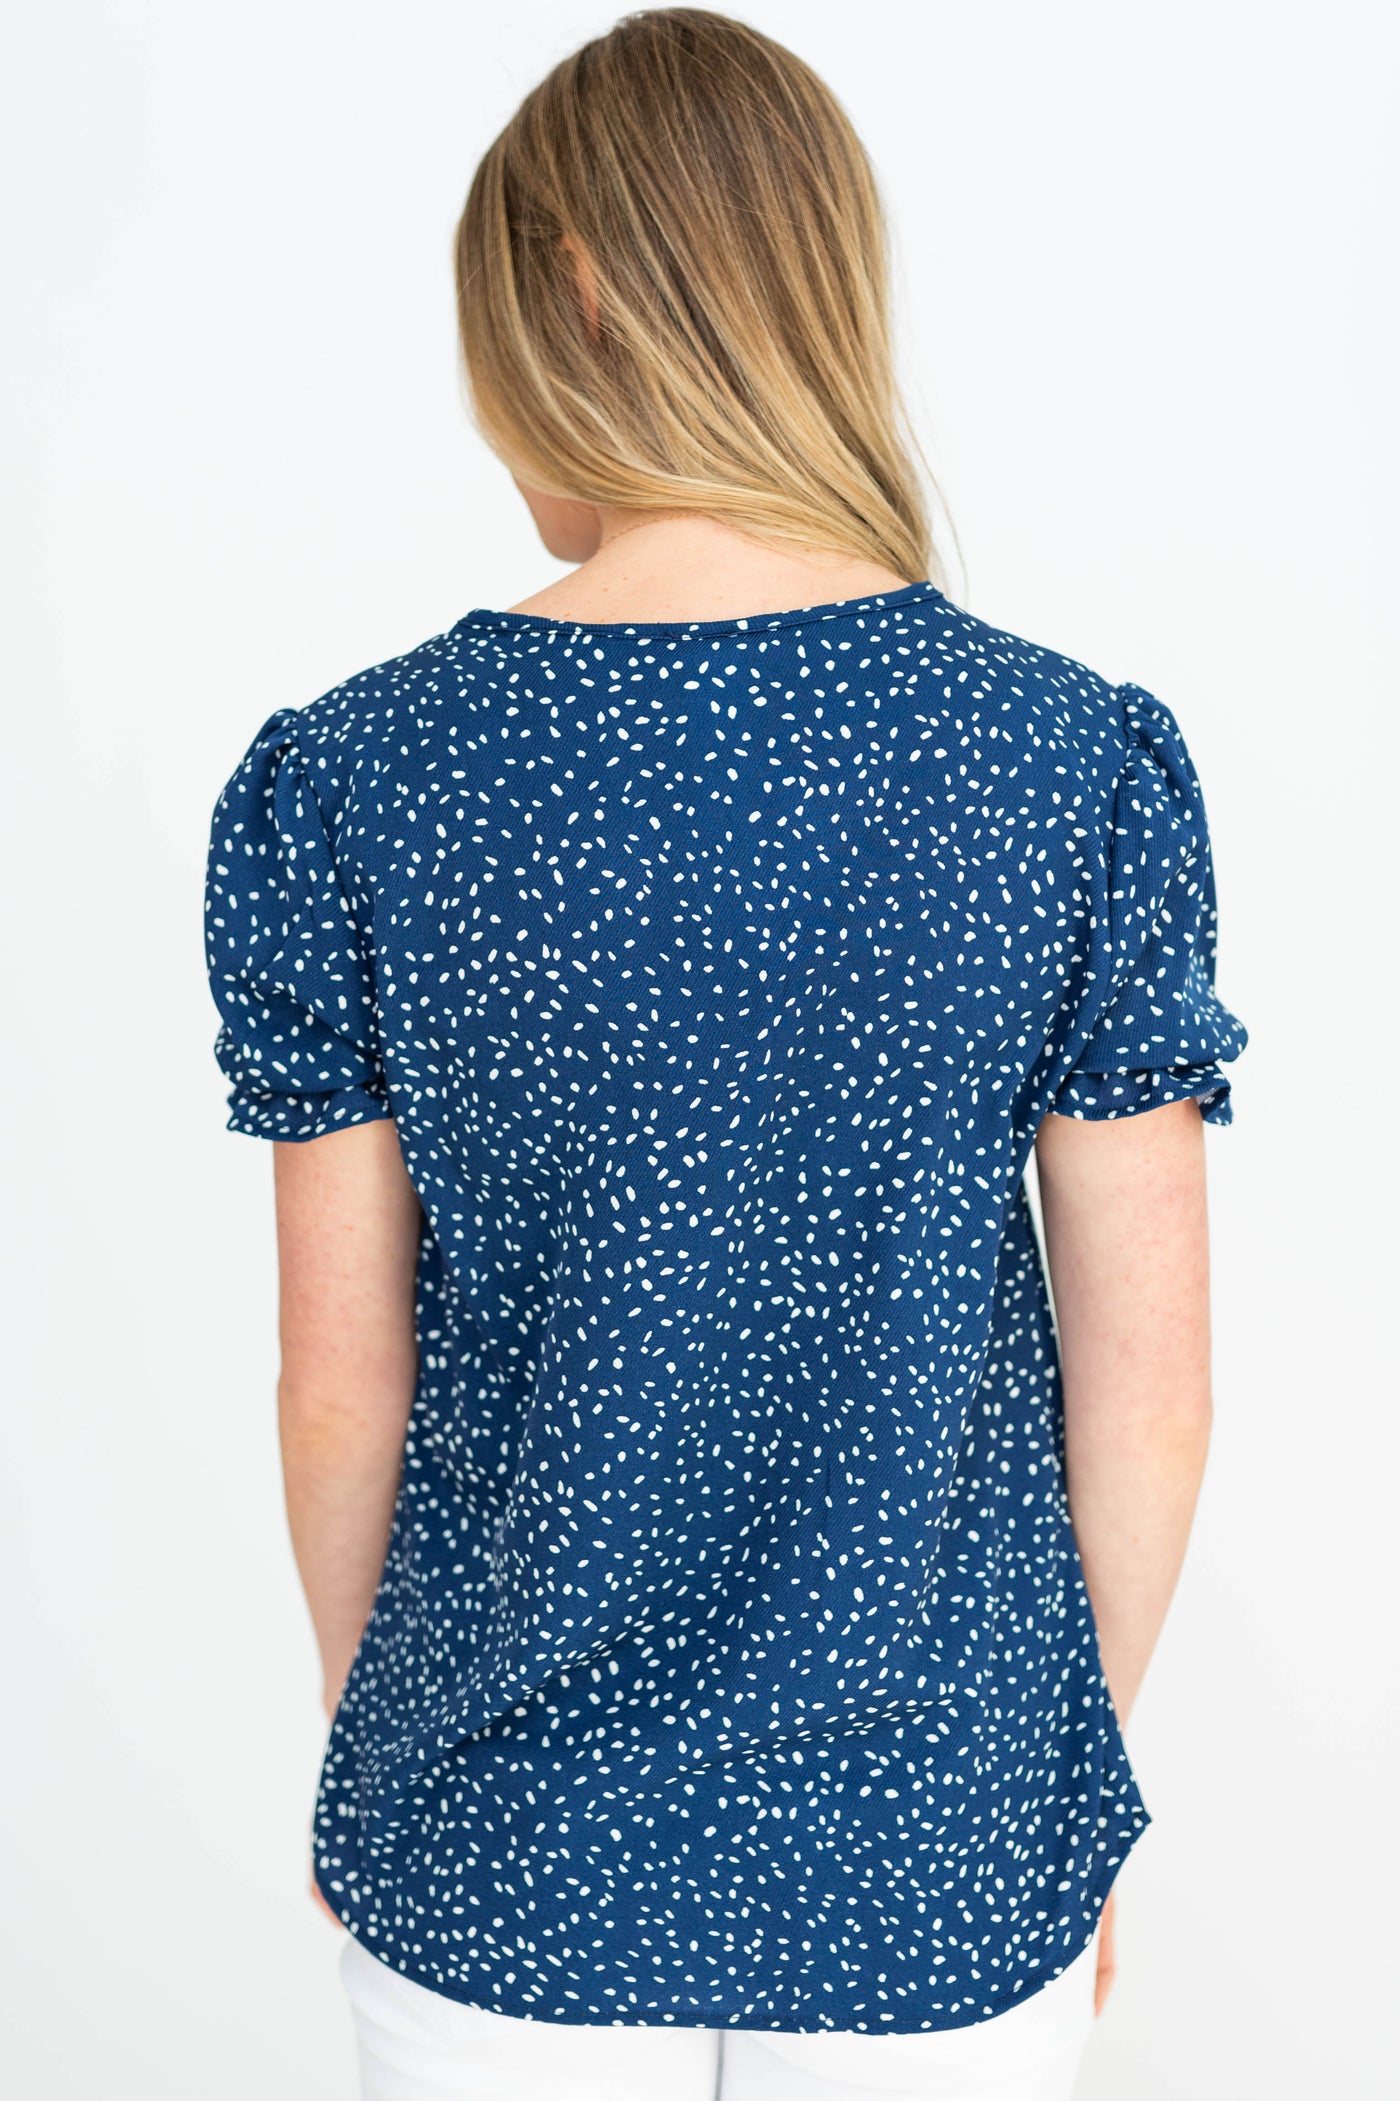 Back view of a navy top